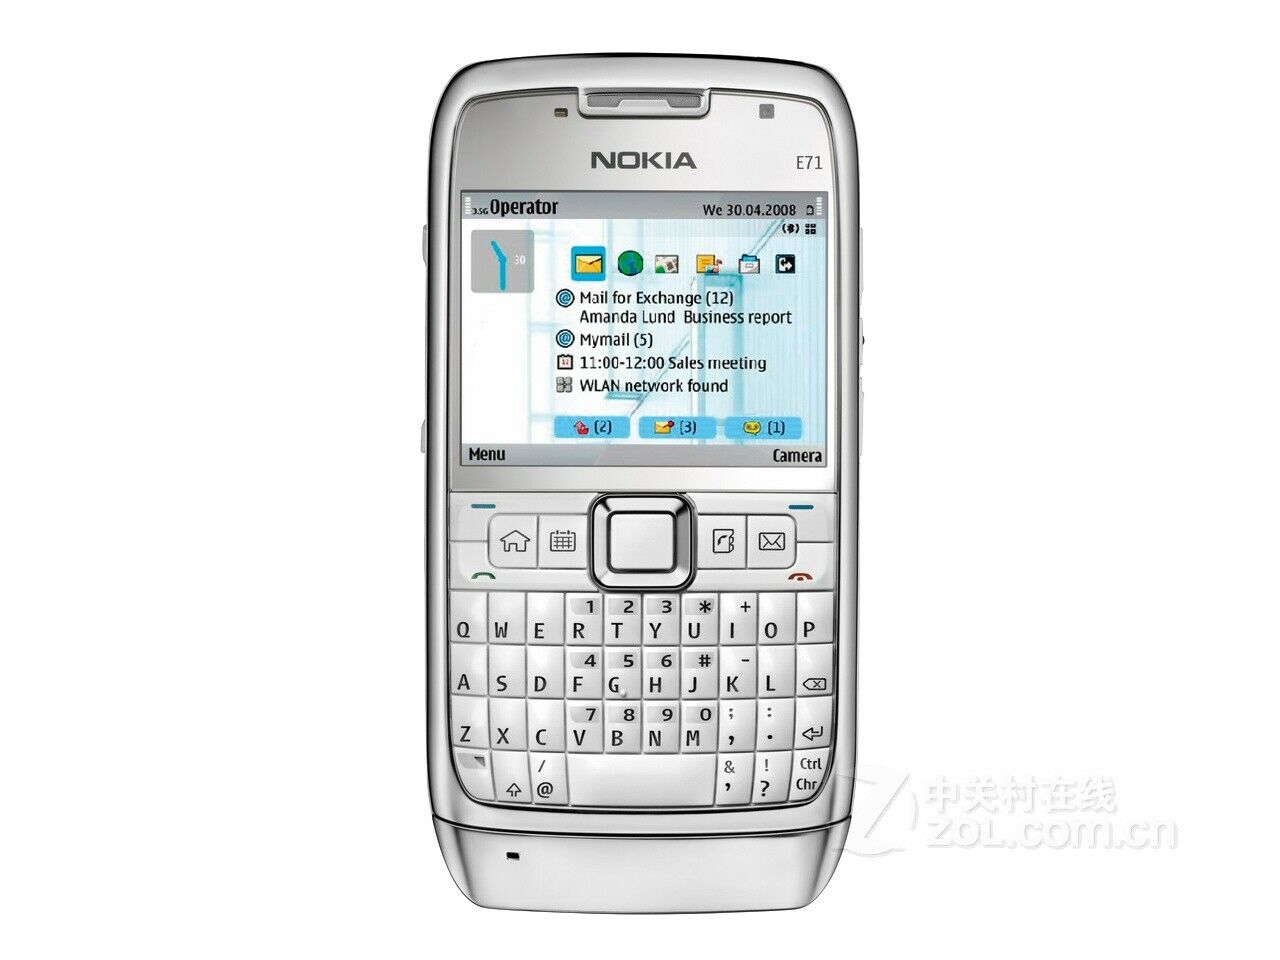 Download Facebook For Nokia E71 Symbian Phone newlet